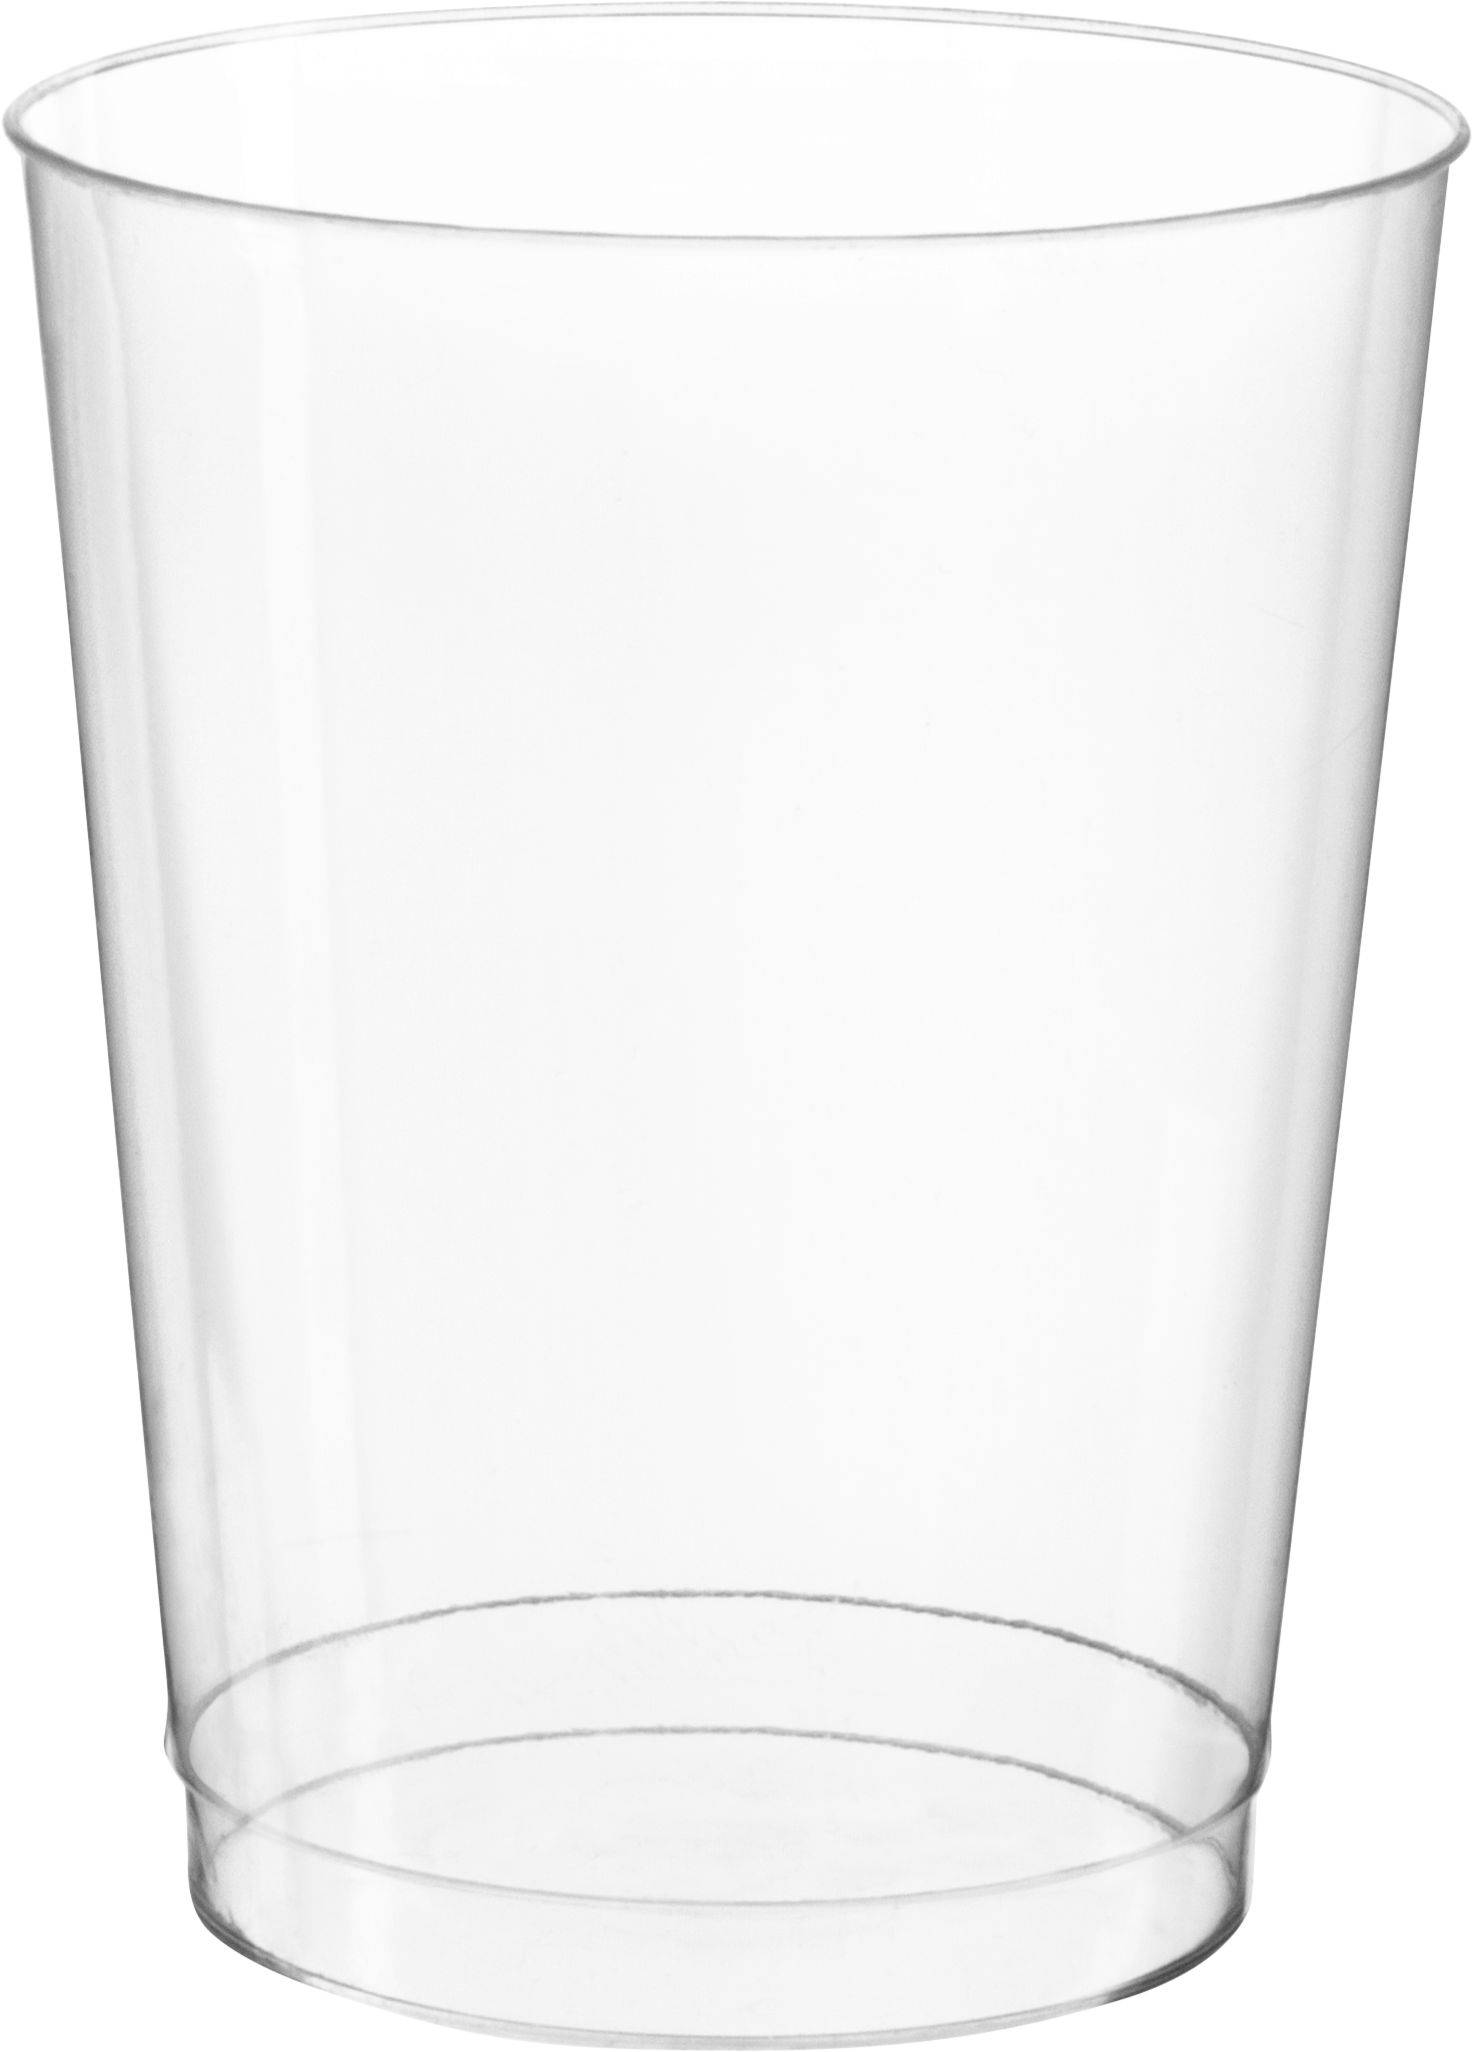 https://media-www.partycity.ca/product/seasonal-gardening/party-city-everyday/party-city-dining-entertaining/8420327/big-party-pack-clear-plastic-cups-72ct-b79812be-735e-409c-b3f0-da5875f15855-jpgrendition.jpg